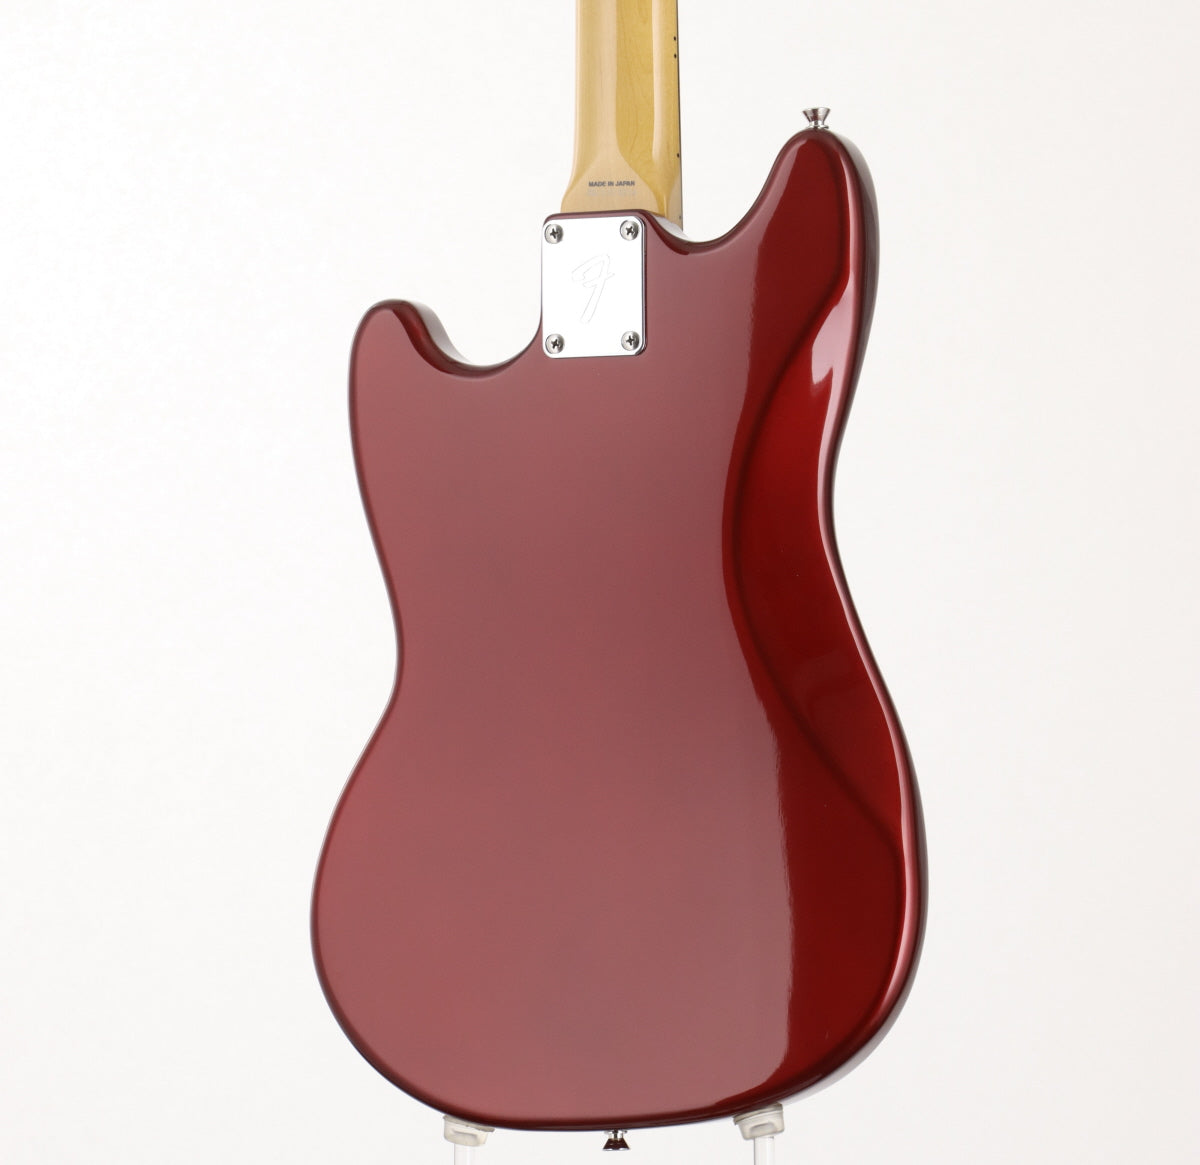 [SN U010214] USED Fender JAPAN / MG69 MH OCR Old Candy Apple Red 2010-2012 [09]